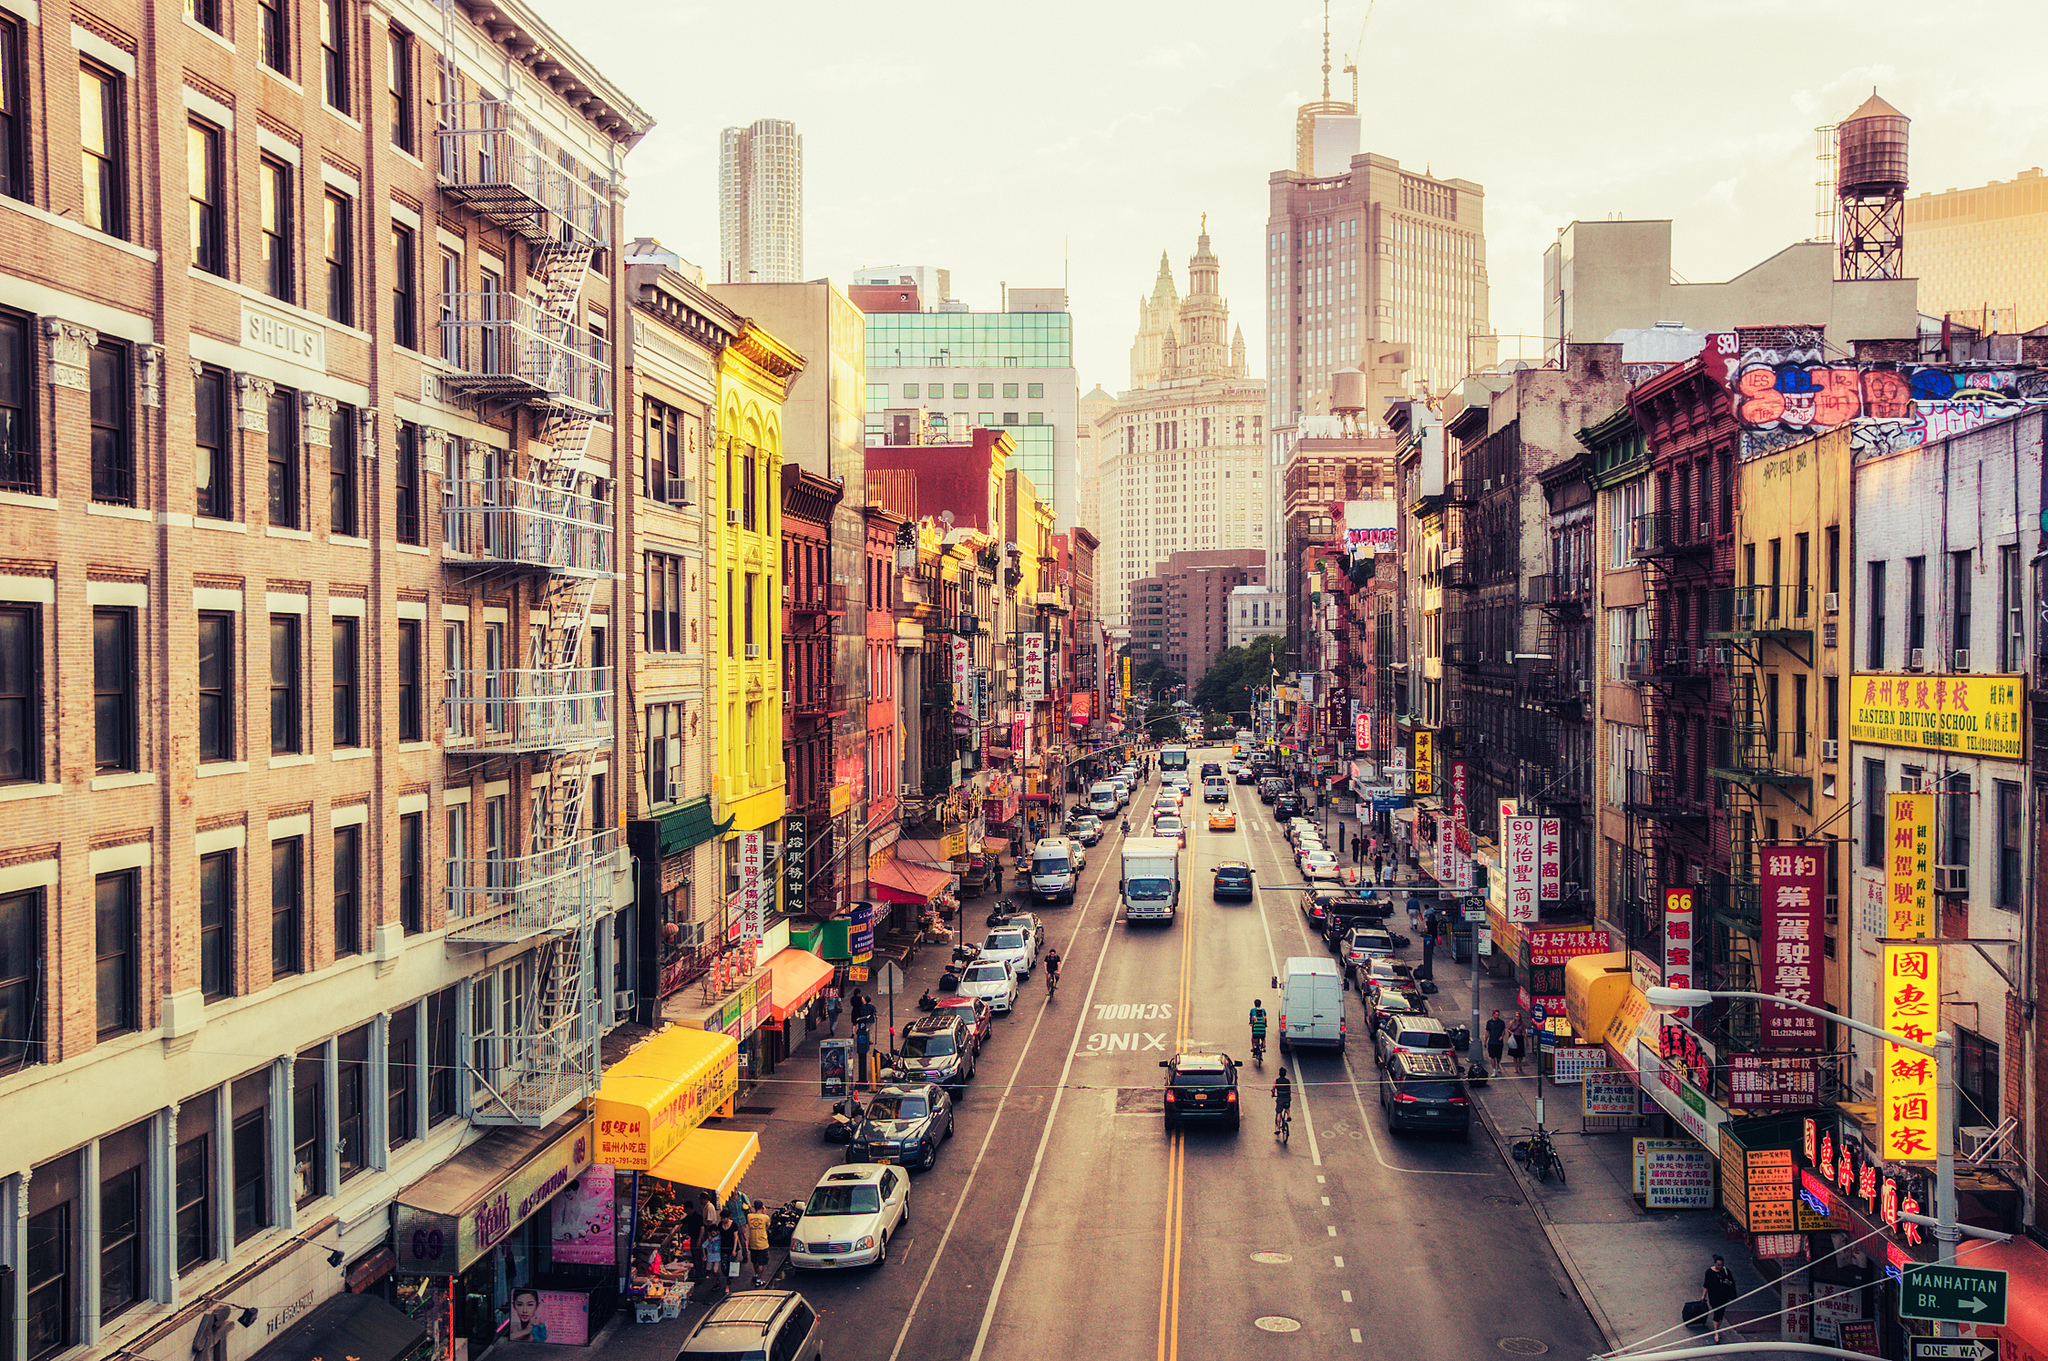 A long, wide thoroughfare in New York's Chinatown (Photo: Vivienne Gucwa via Flickr)